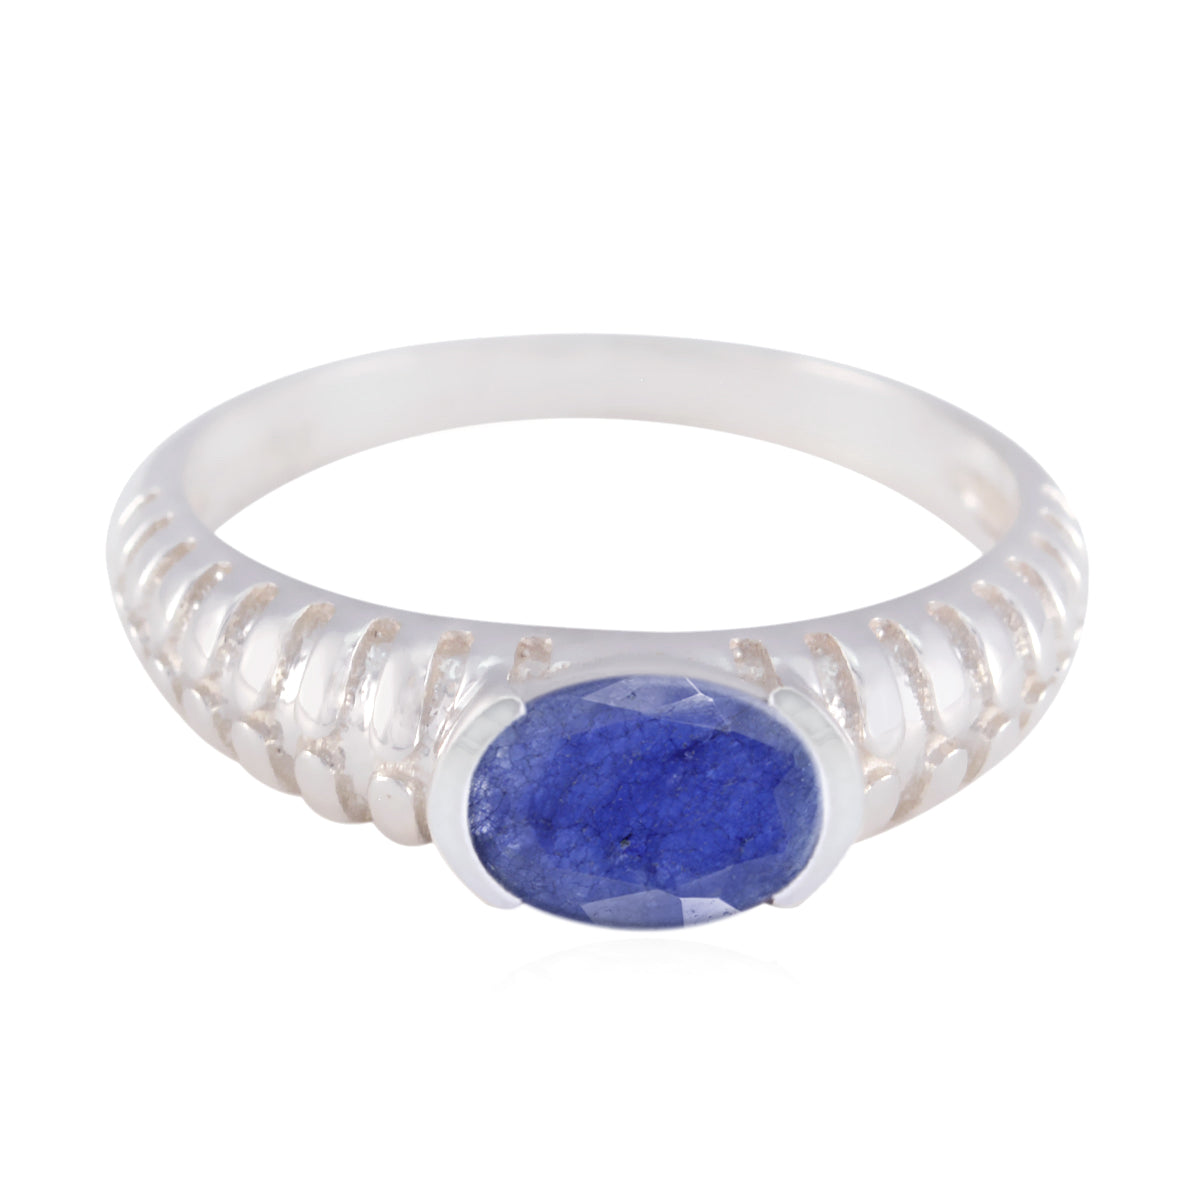 Dollish Gemstones Indiansapphire 925 Silver Rings Jewelry Suppliers